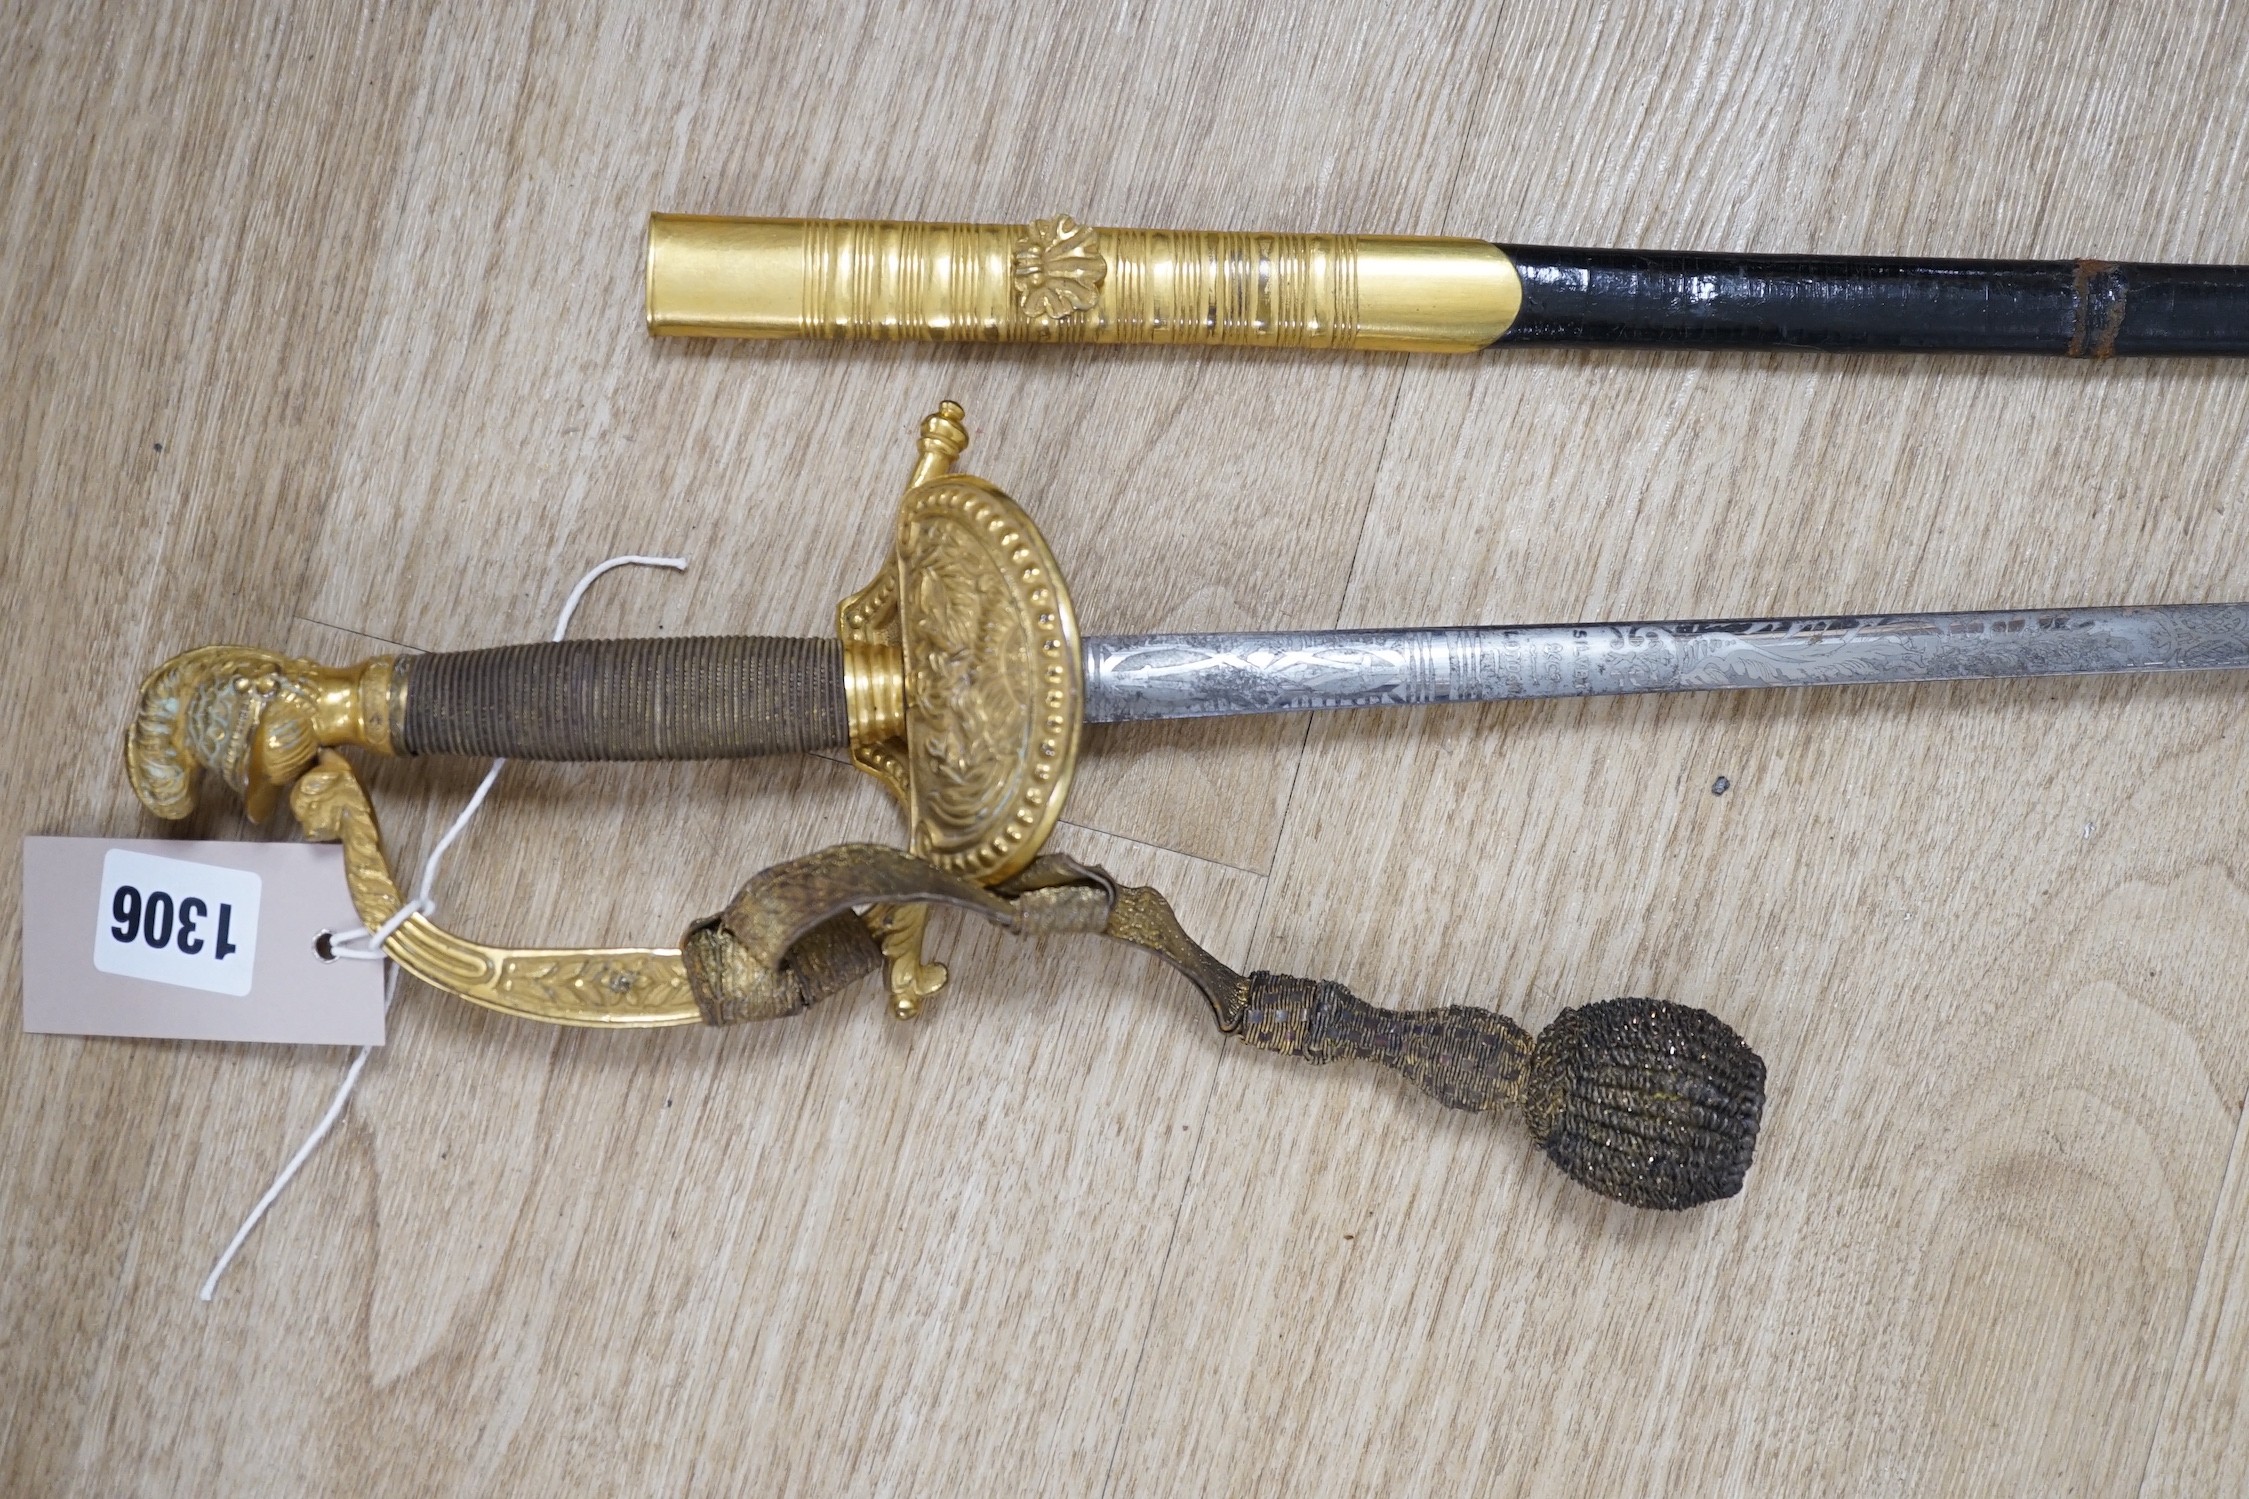 A 19th century officer's dress sword, made by Silver &Co. London with scabbard and leather cover - Image 2 of 5